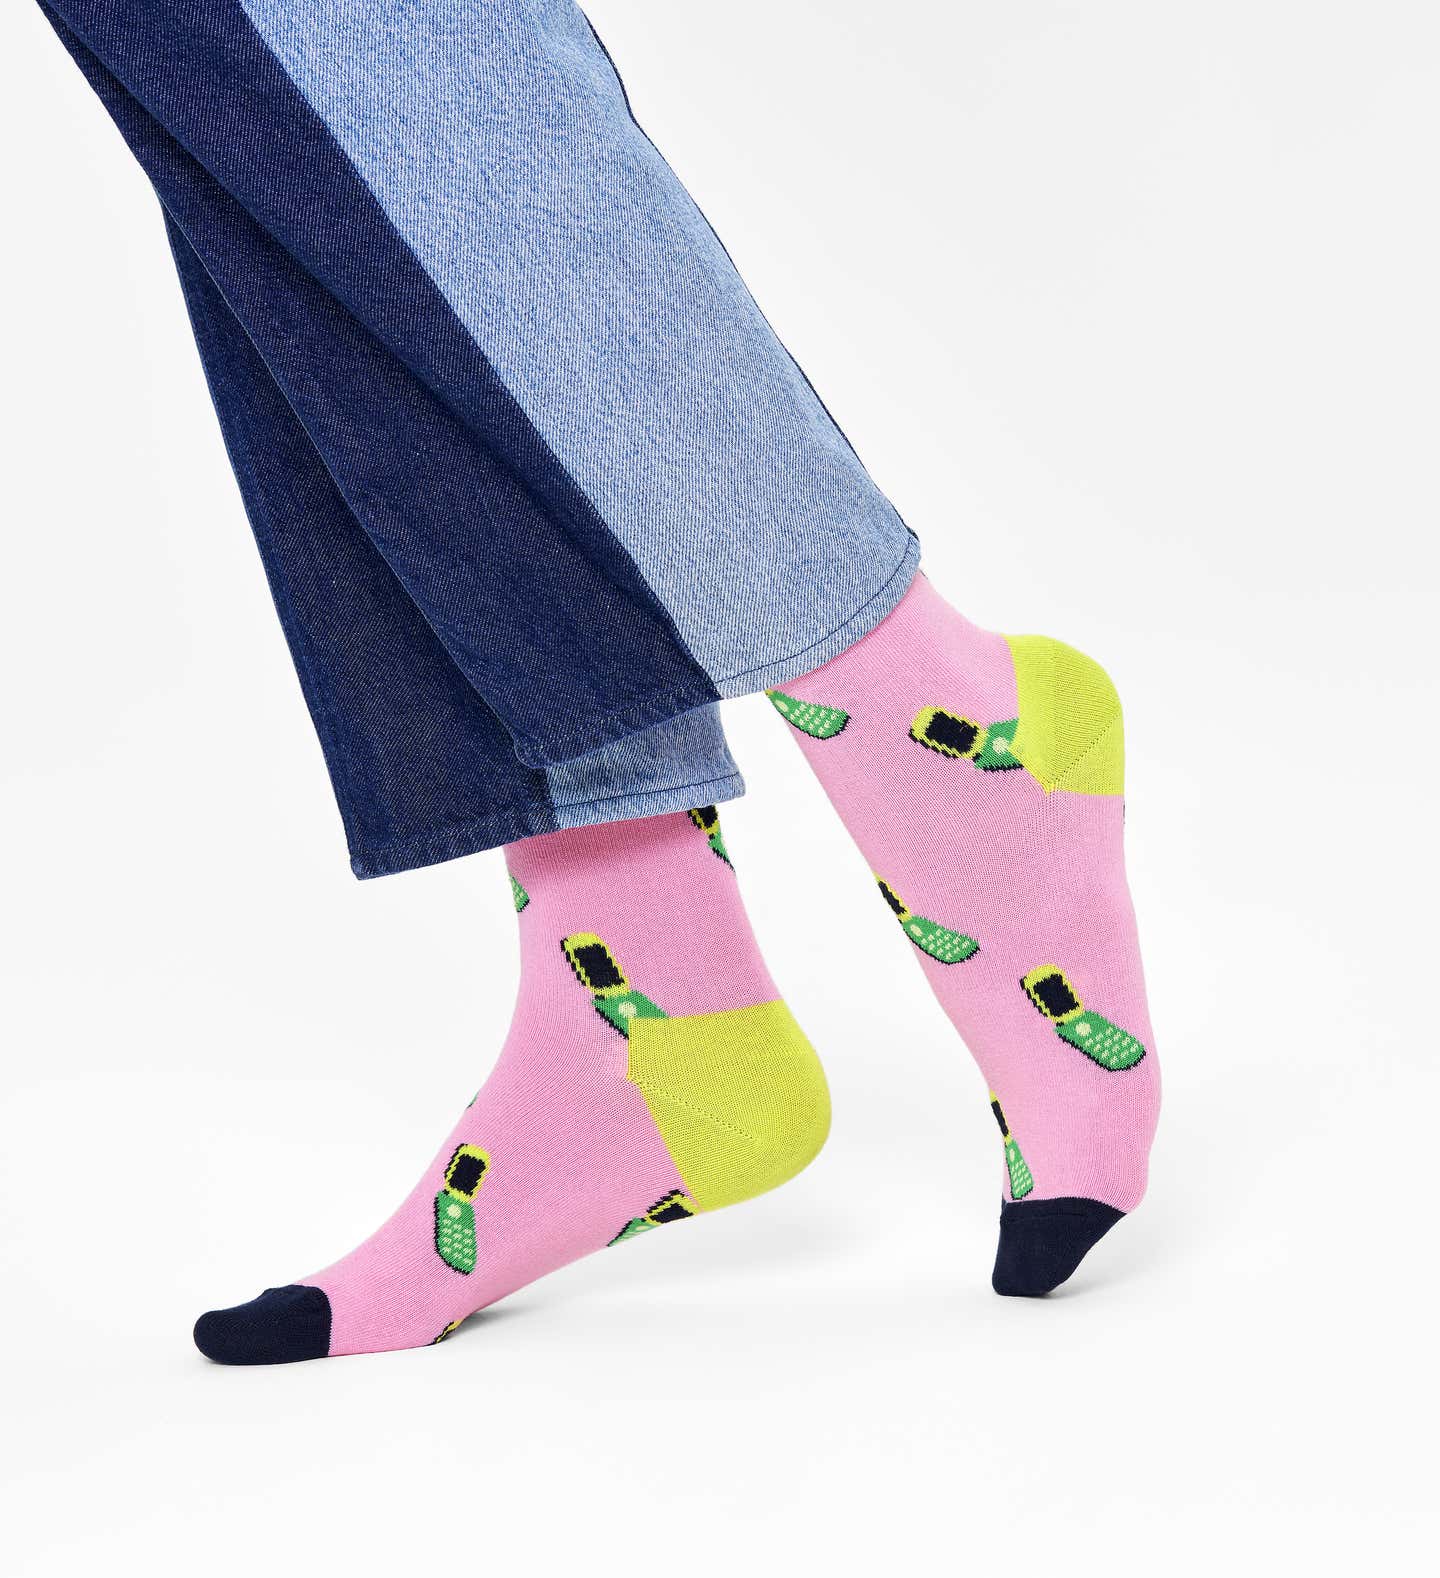 Happy Socks CMM01-3300 Call Me Maybe Sock - Light pink cotton socks with a flip phone style pattern in shades of green and black, bright lime green heel and black toe.